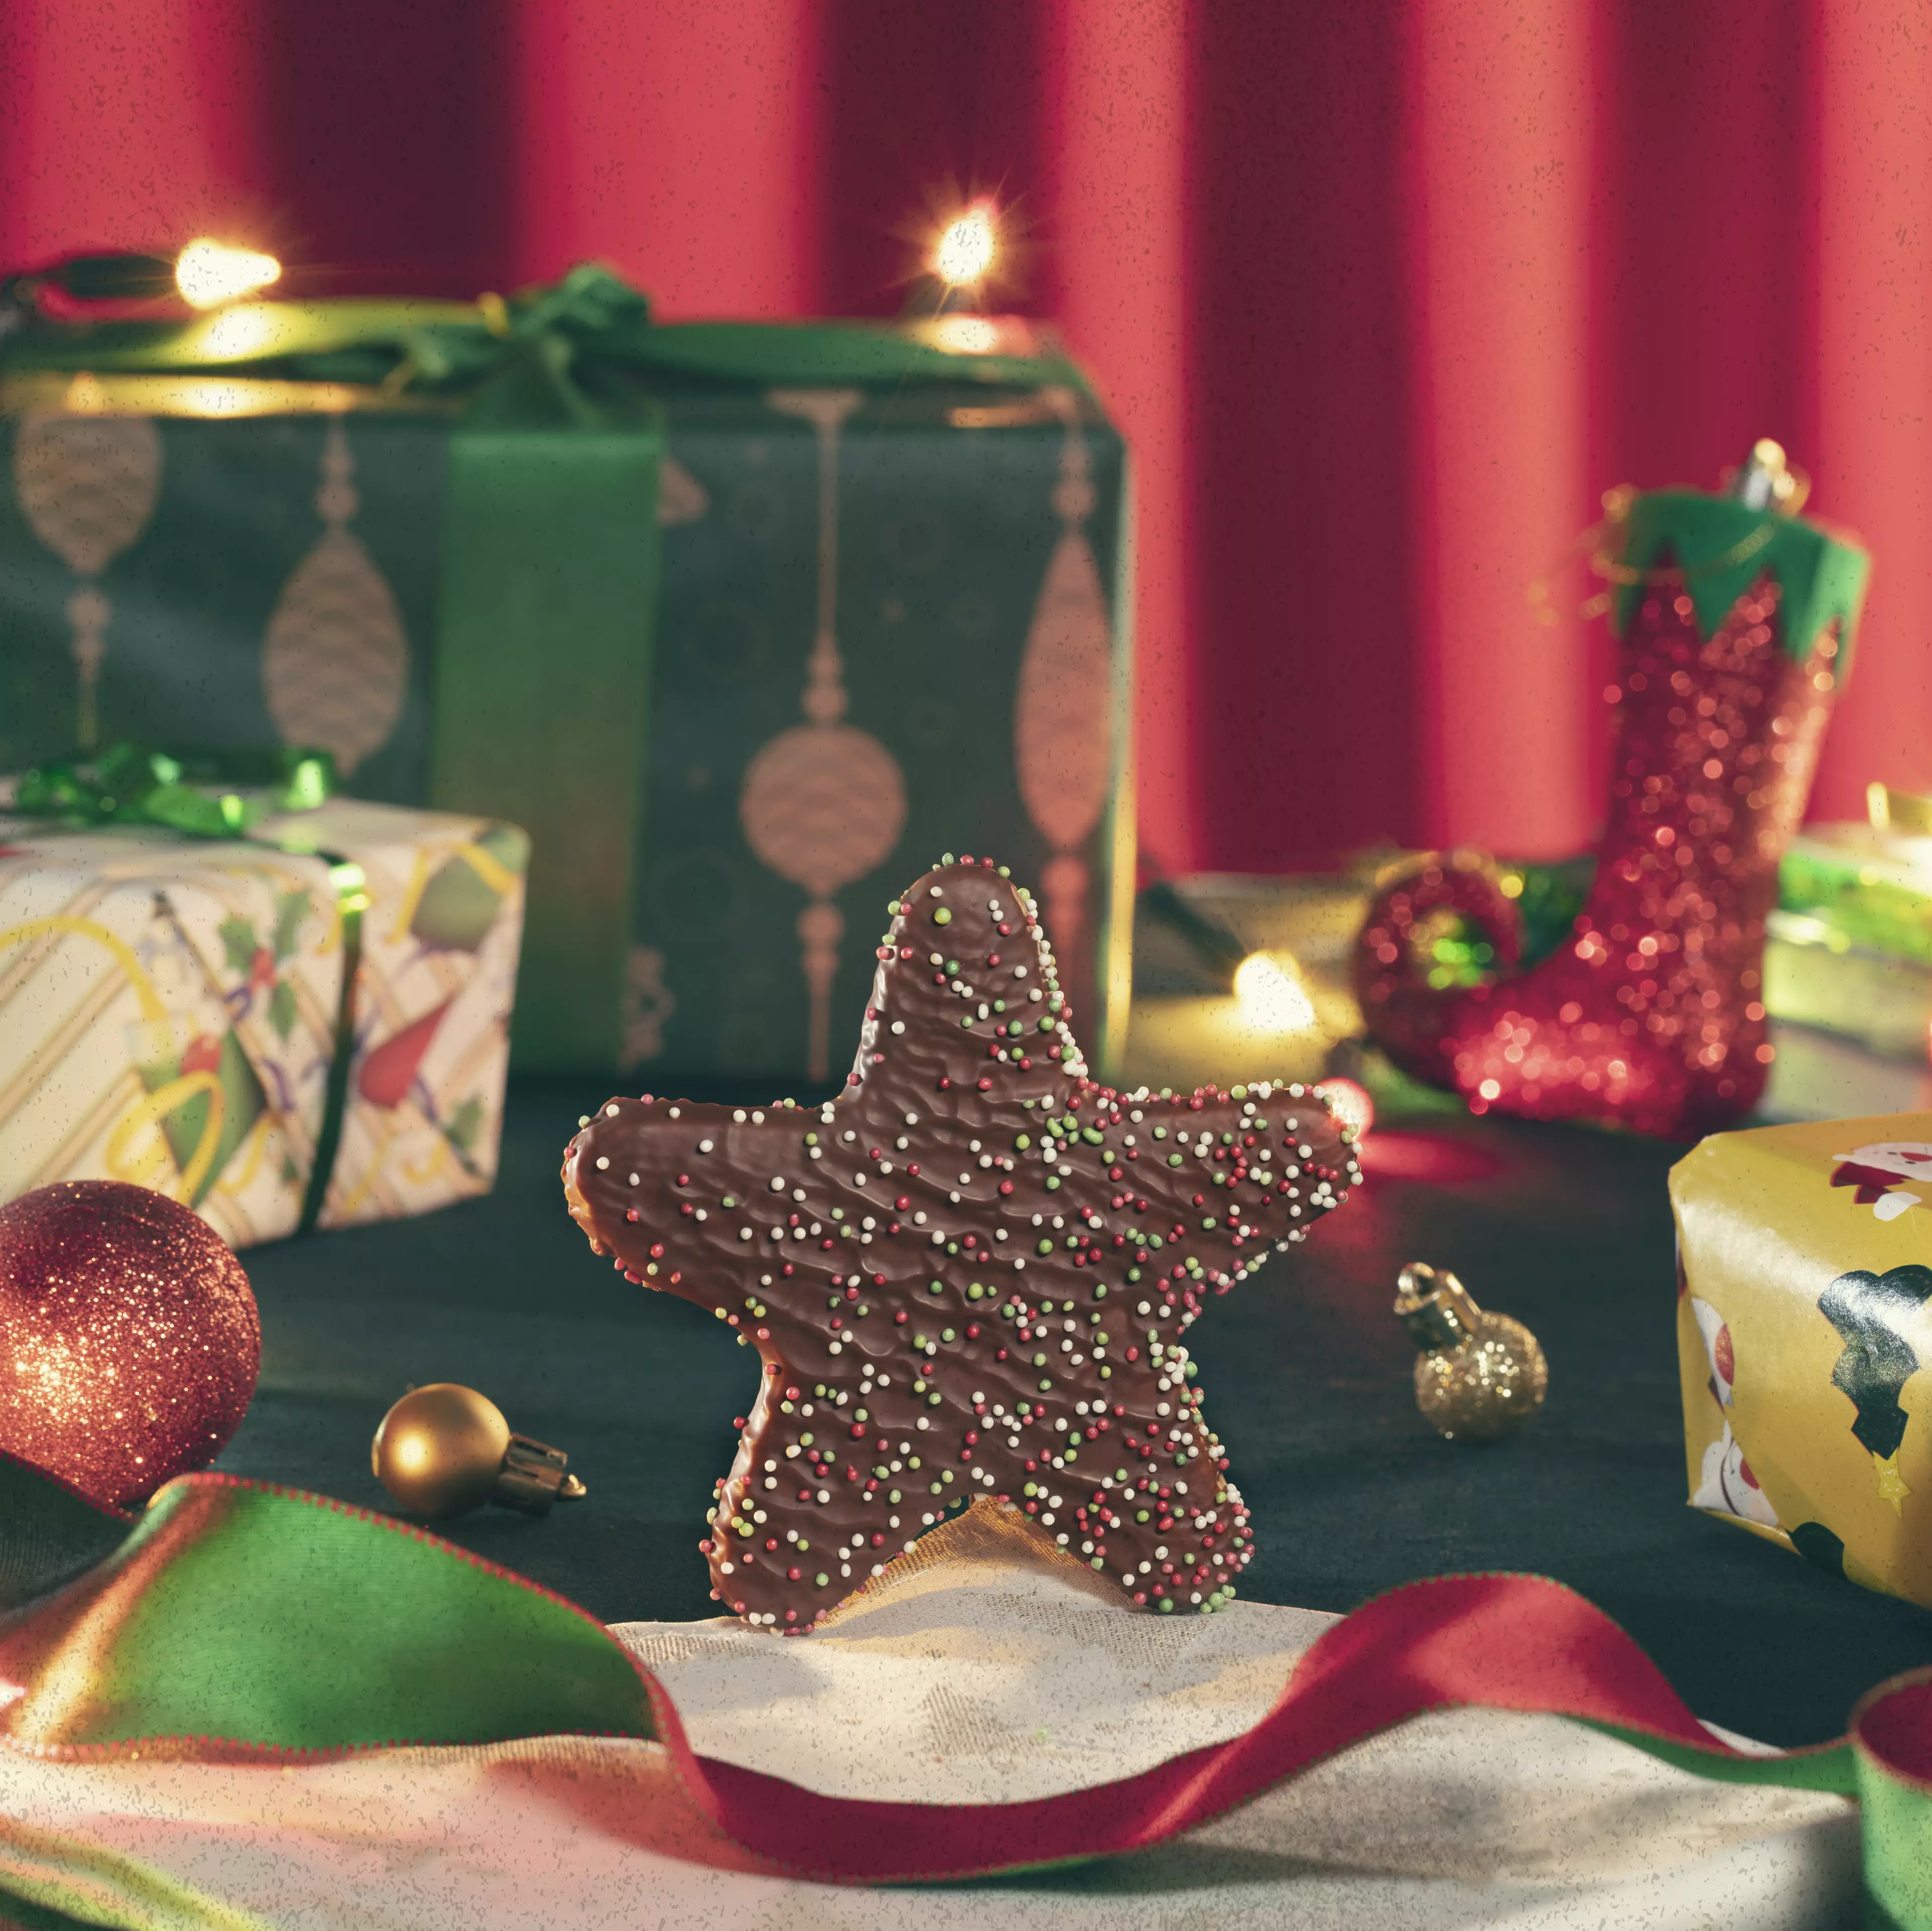 Greggs has also launched five festive sweet treats.